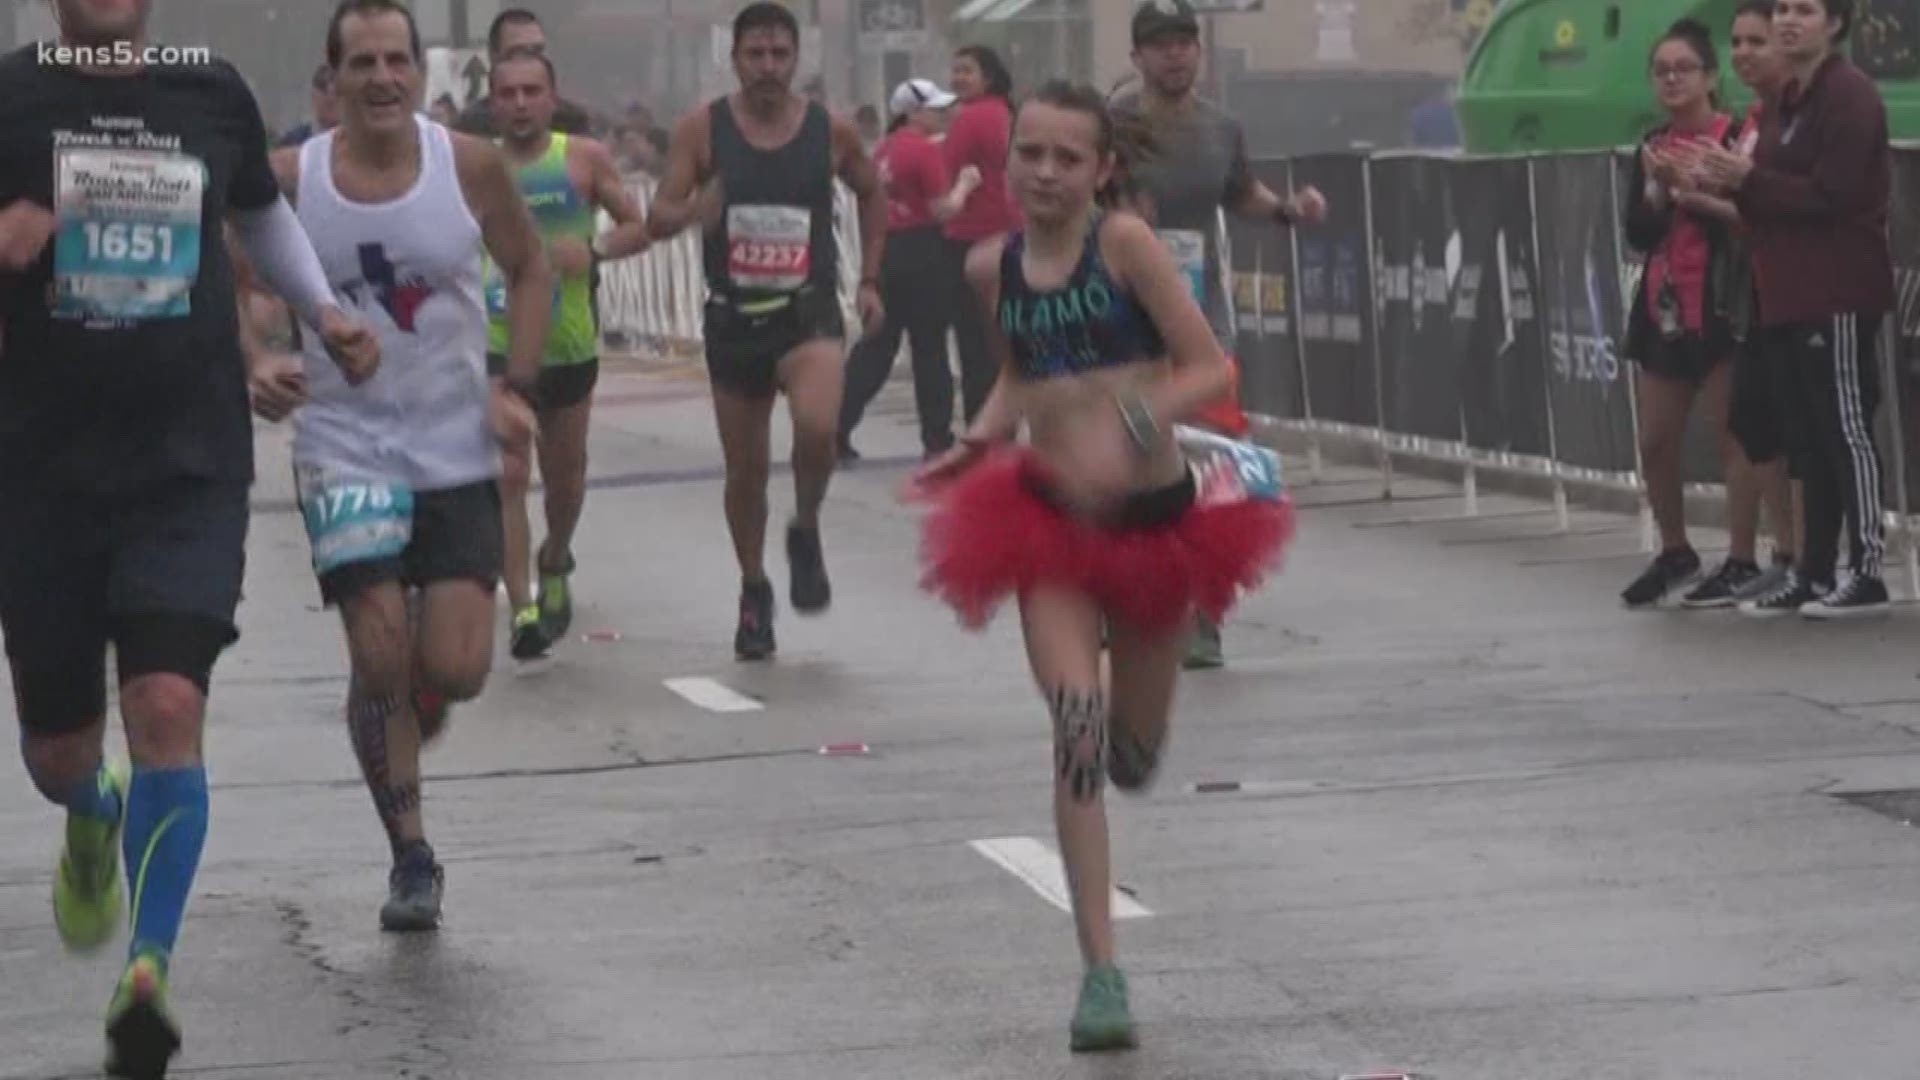 An 11-year-old girl took on the Rock 'N' Roll half marathon in her signature tutu, adding another race to her growing list.